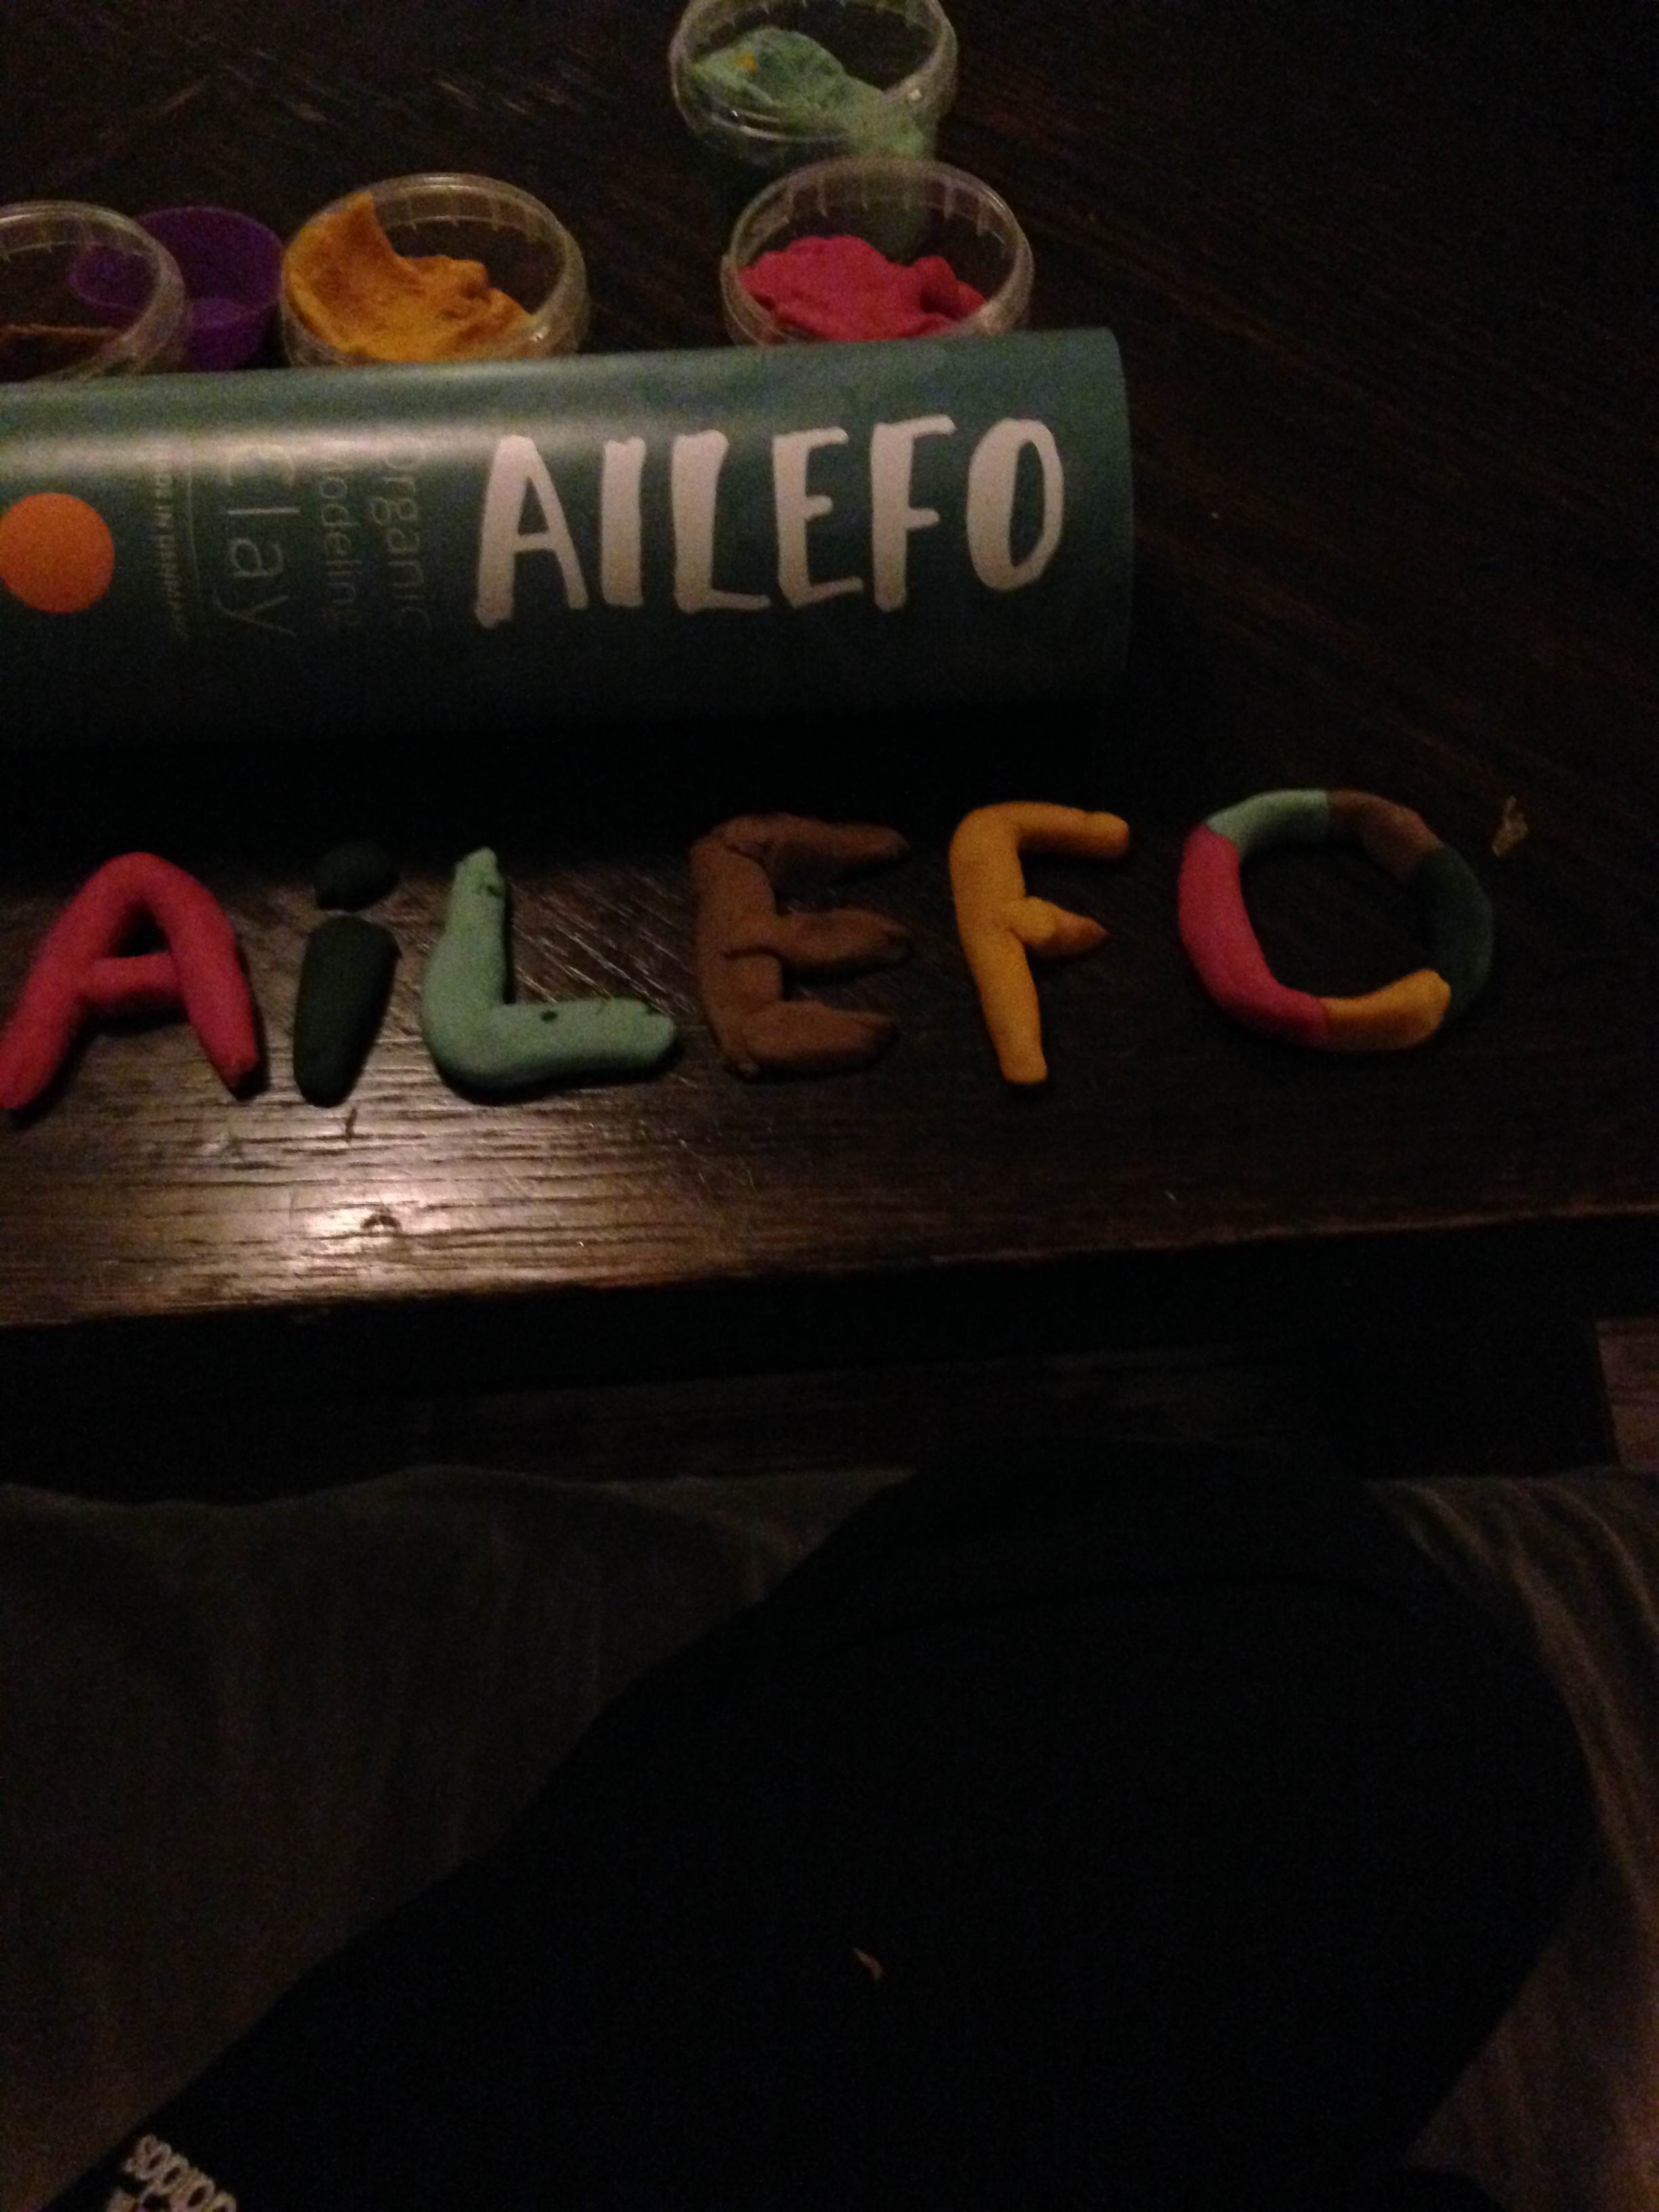 ailefo organic modeling clay, ailefo letters